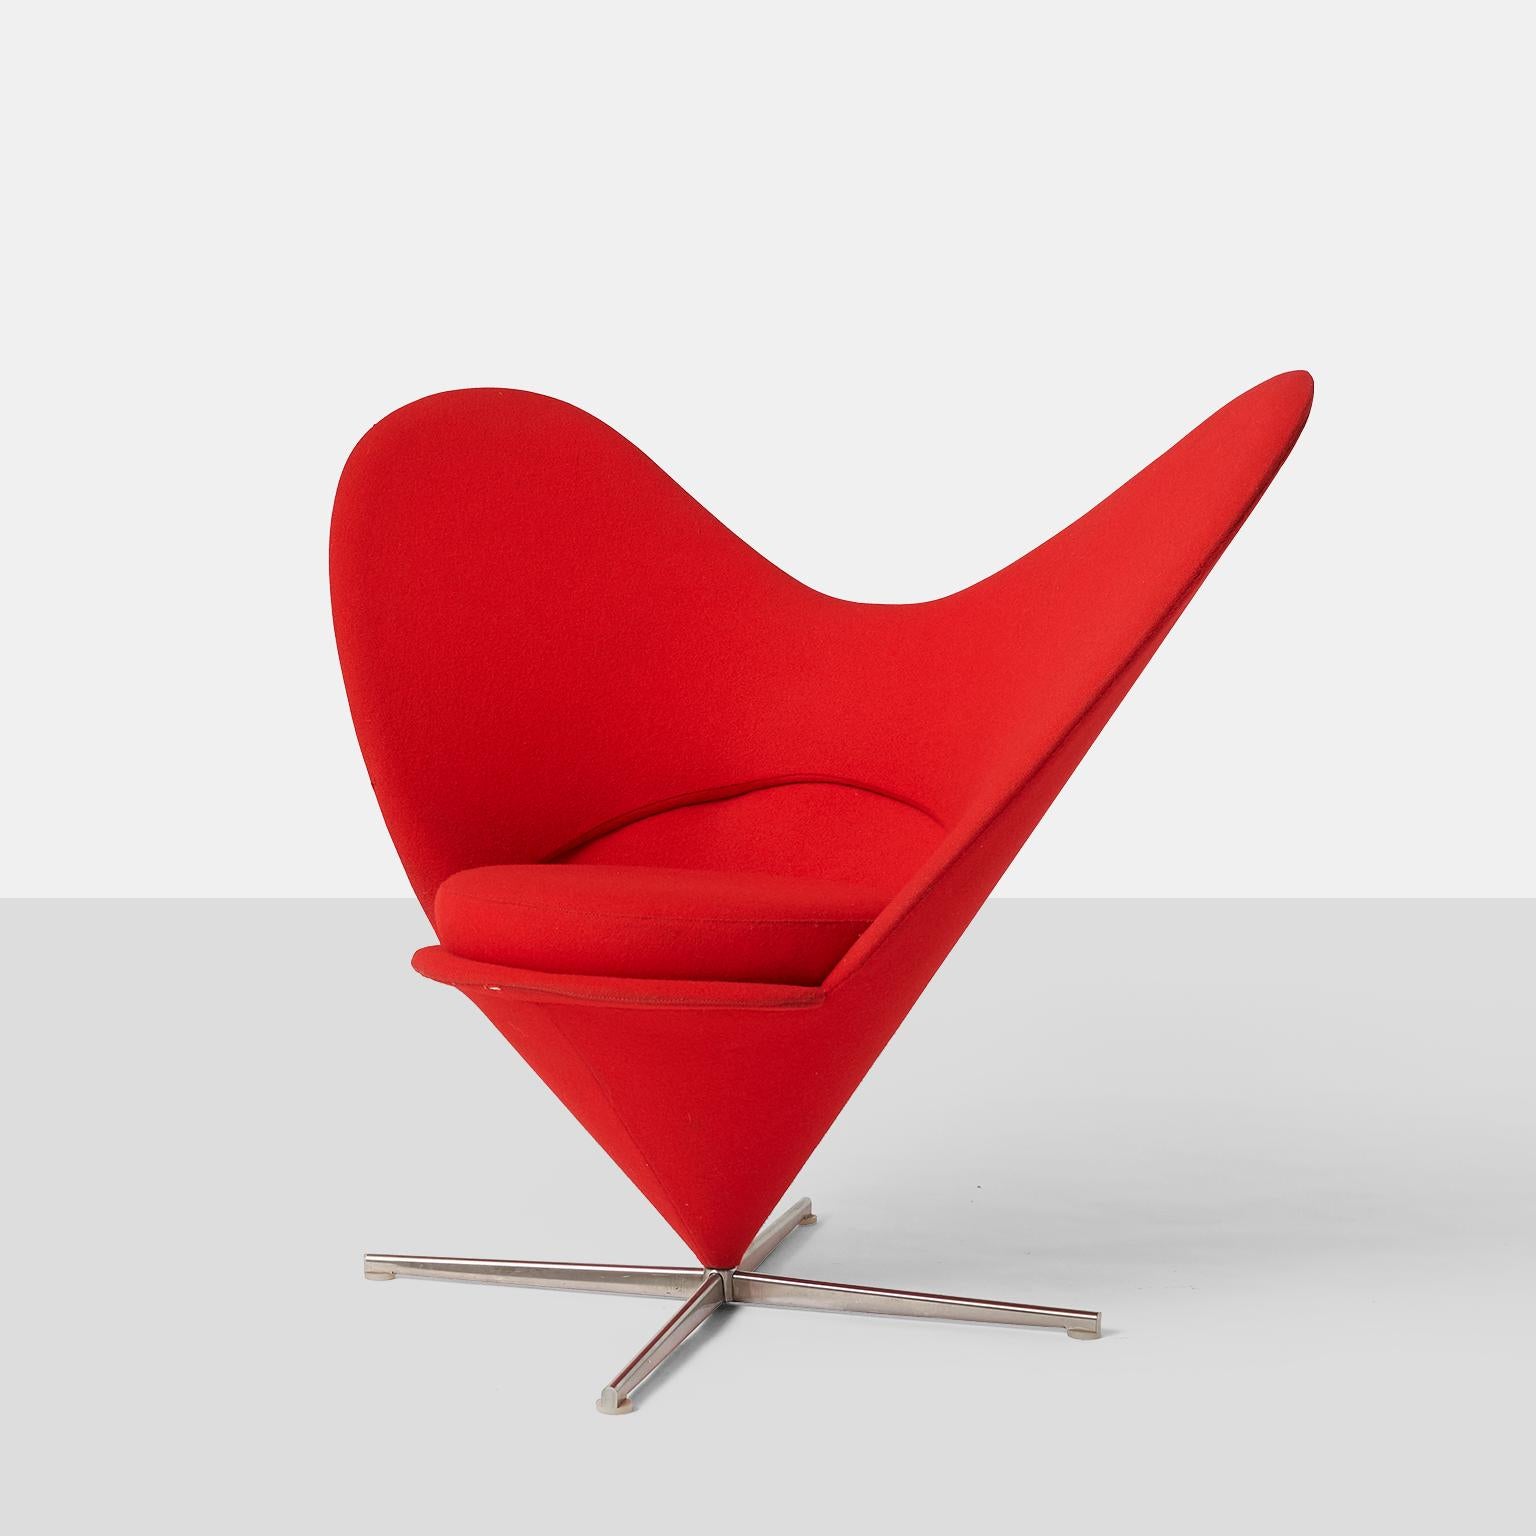 An iconic red heart cone chair by Vernor Panton. Designed in 1958, this chair was produced by Vitra in 2000. 

The fabric is in original condition with some signs of use. One chair has 2 small holes in the fabric along the seam.

Two available.